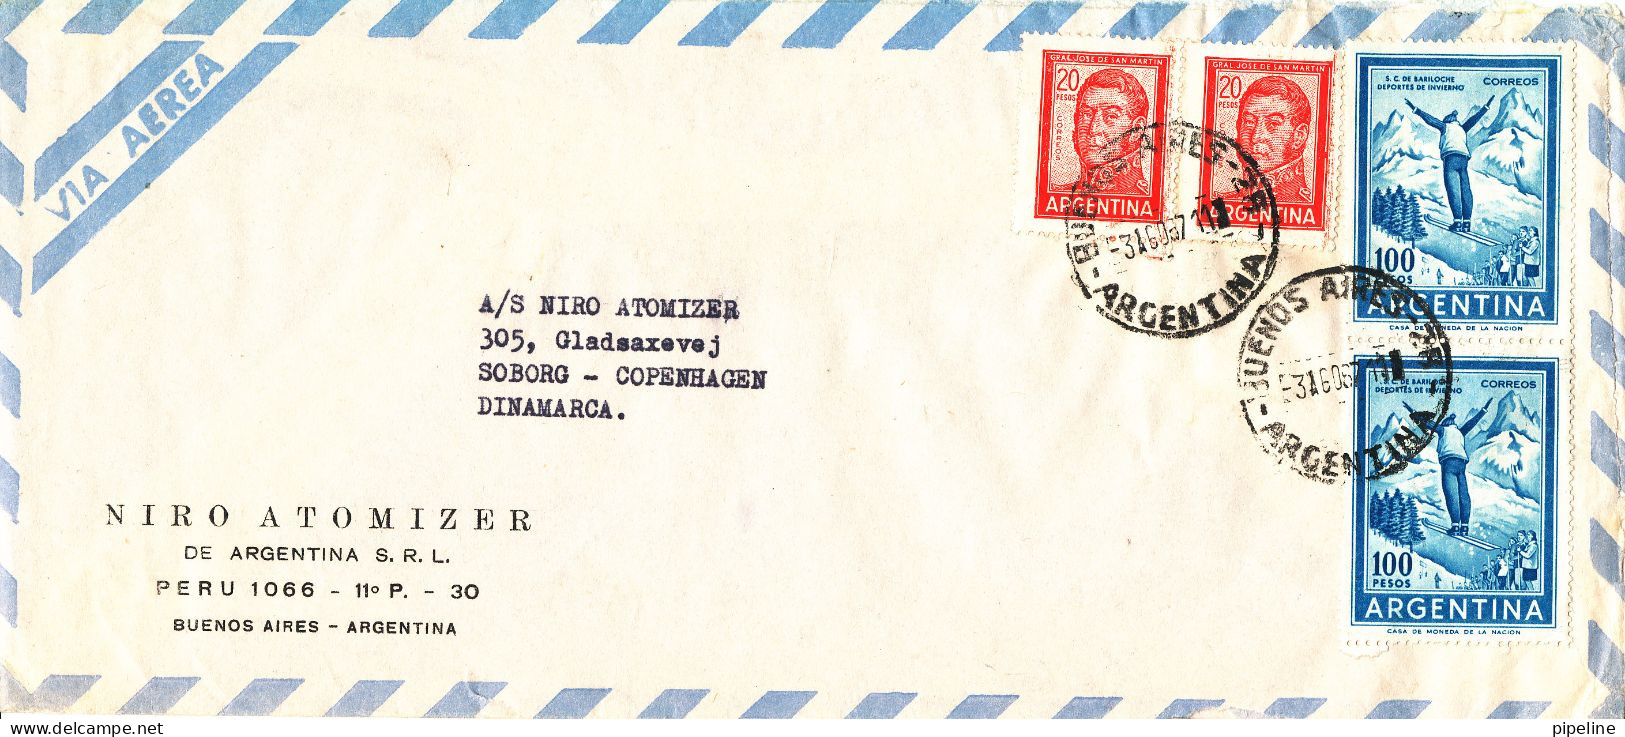 Argentina Air Mail Cover Sent To Denmark 3-8-1967 Topic Stamps The Cover Is Opened On 3 Sides - Posta Aerea